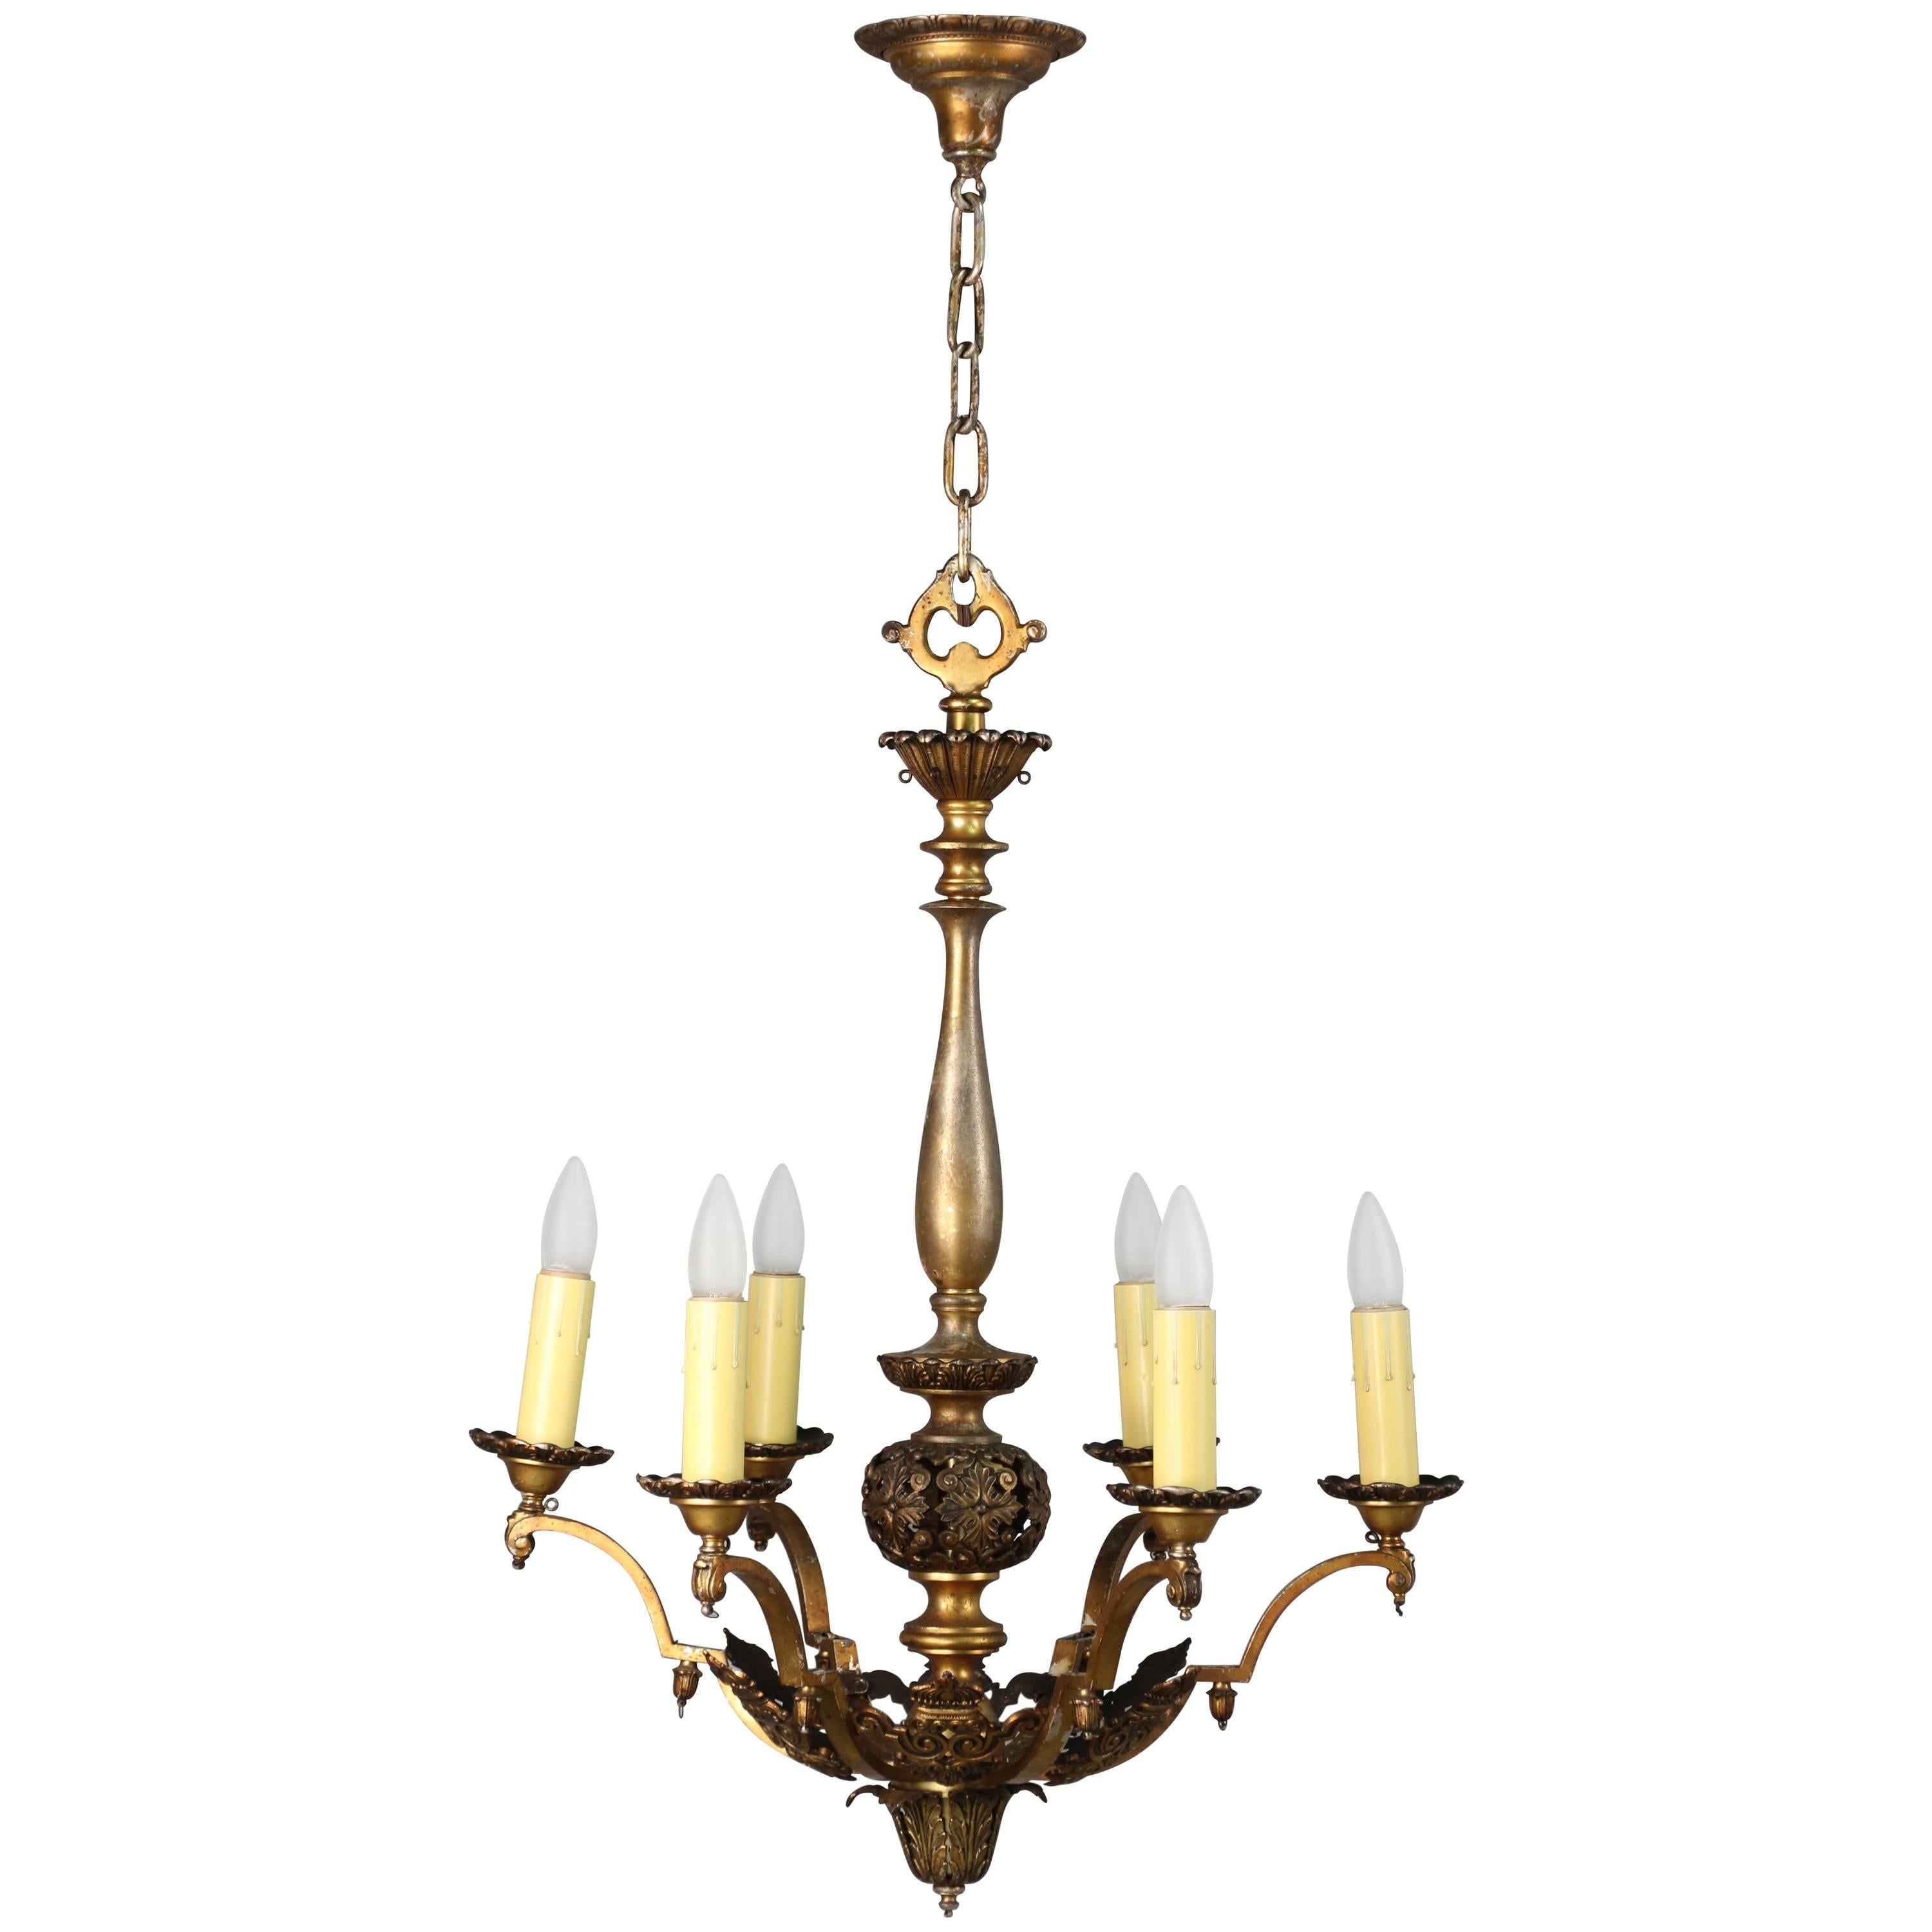 Very Fine Larger Scale 1920s Six-Light Chandelier For Sale